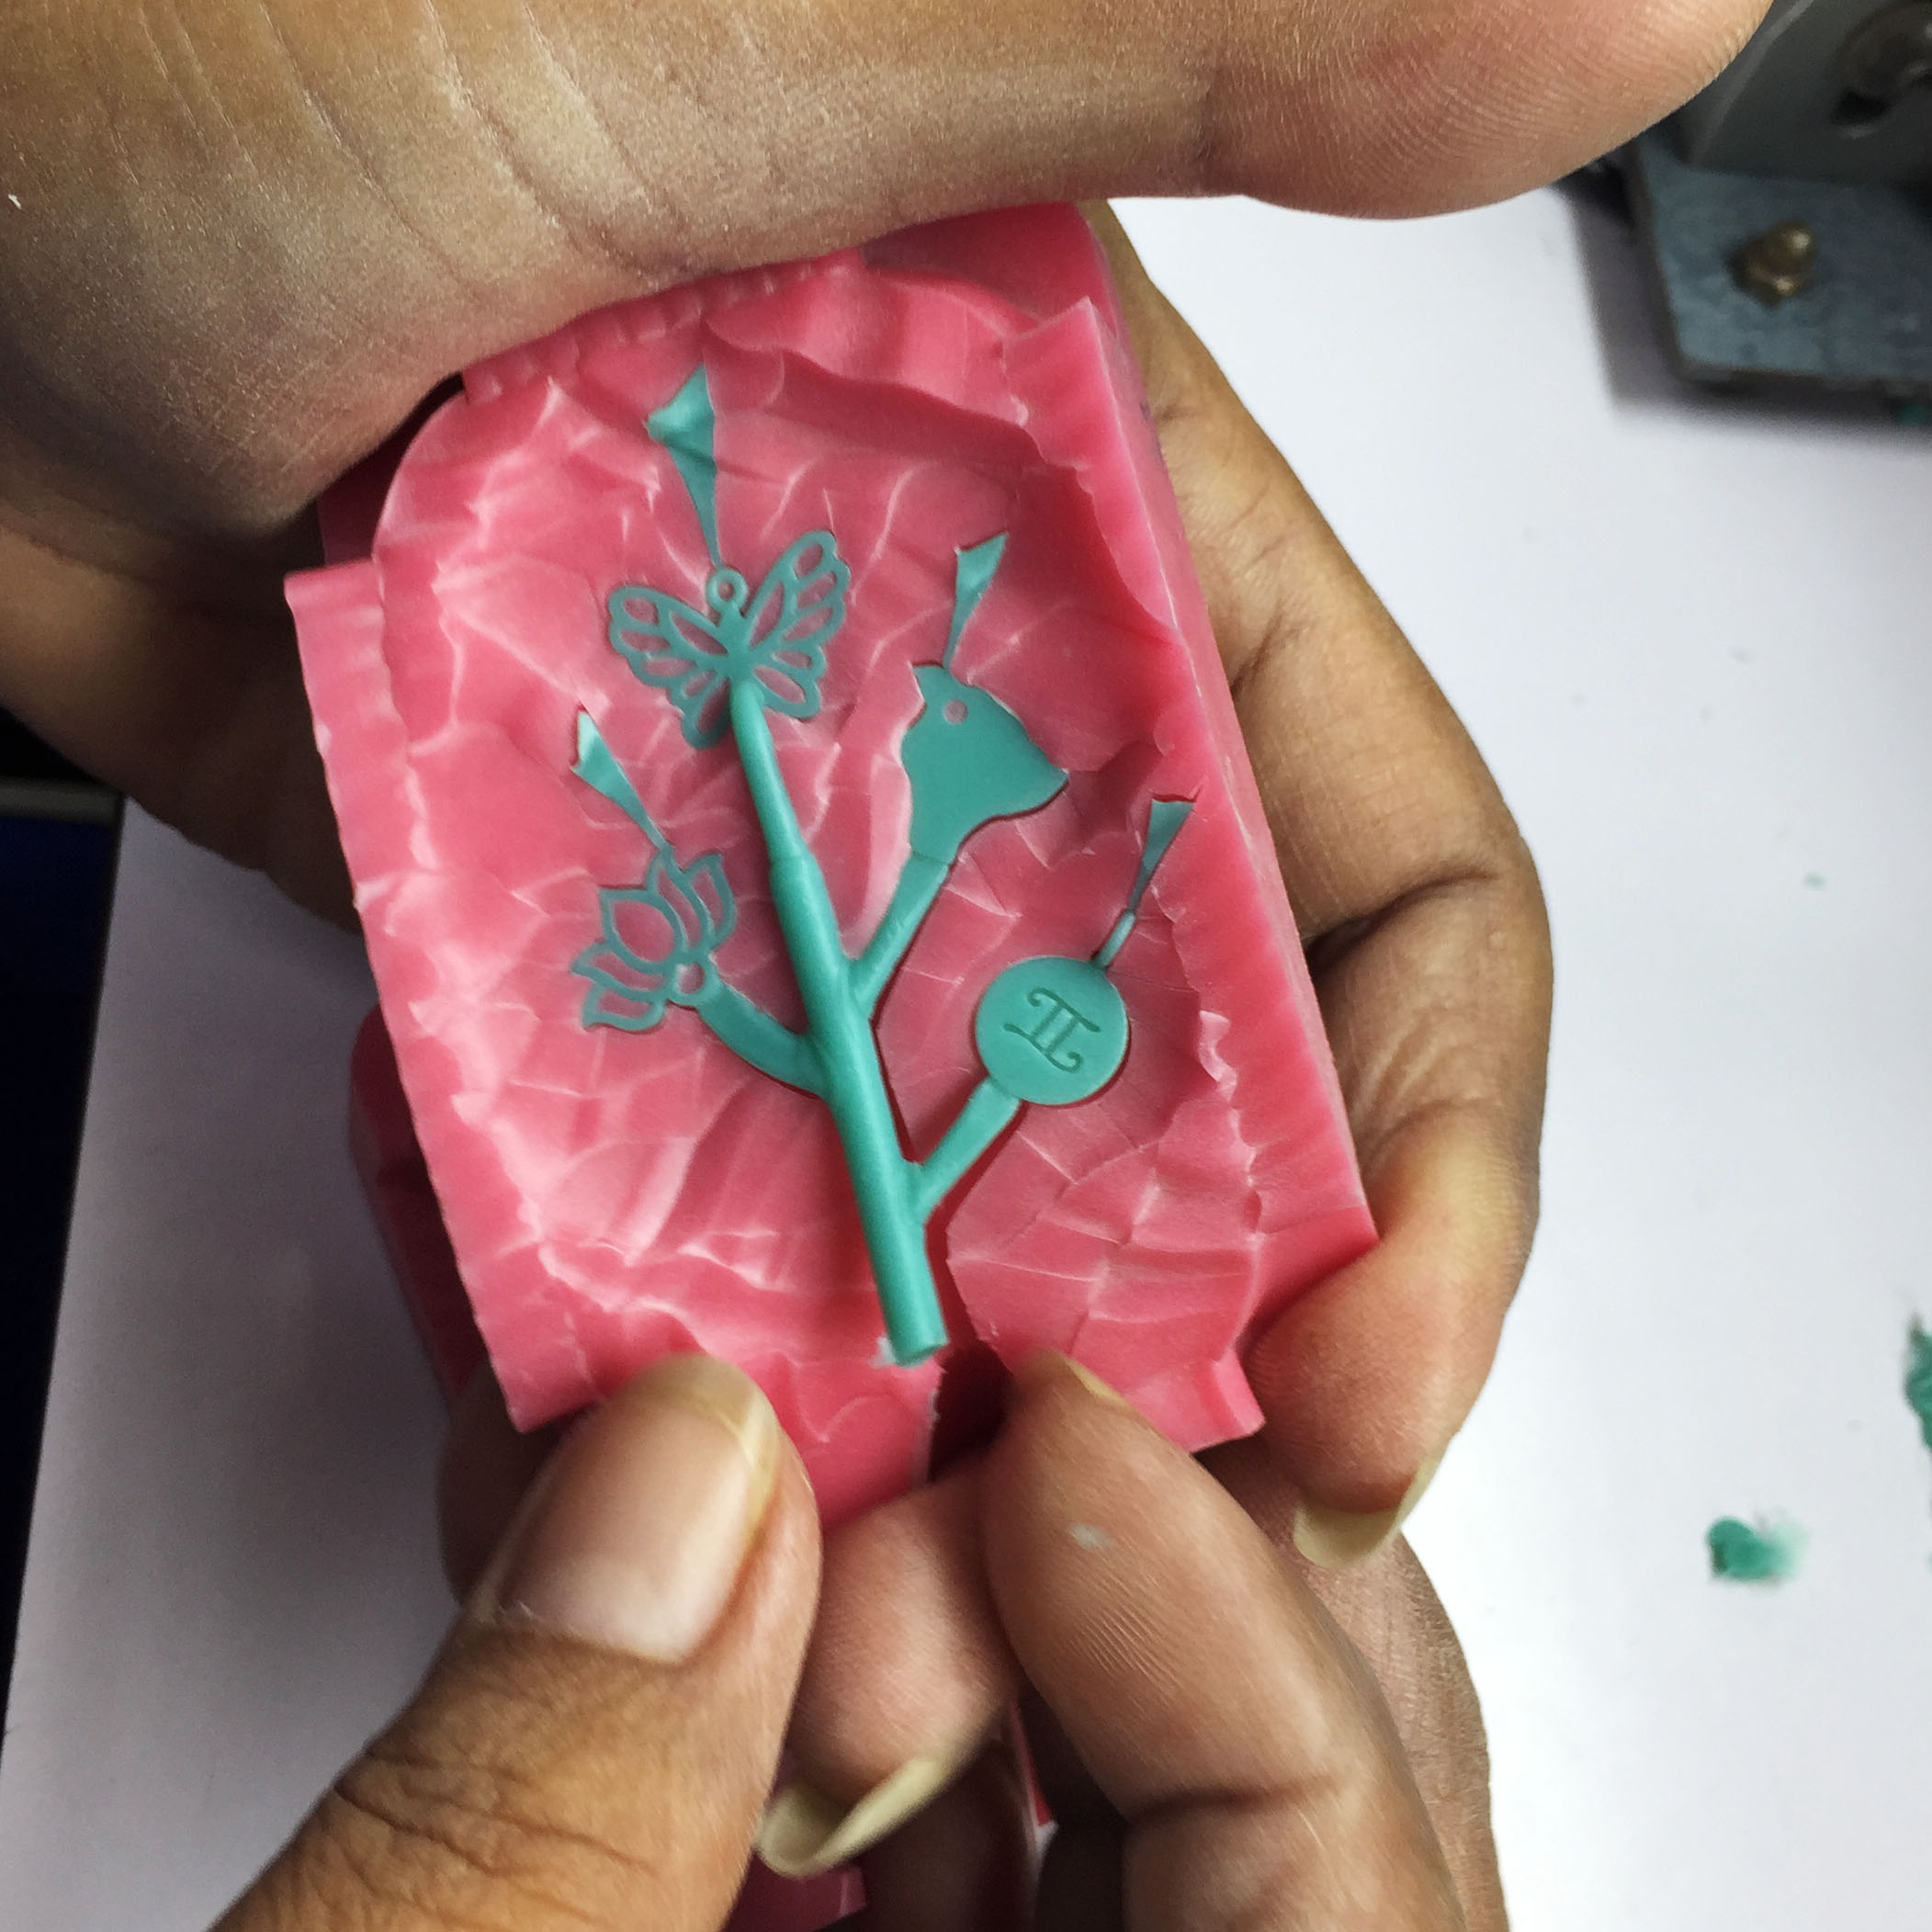 Wax Charms Being Removed from Mold